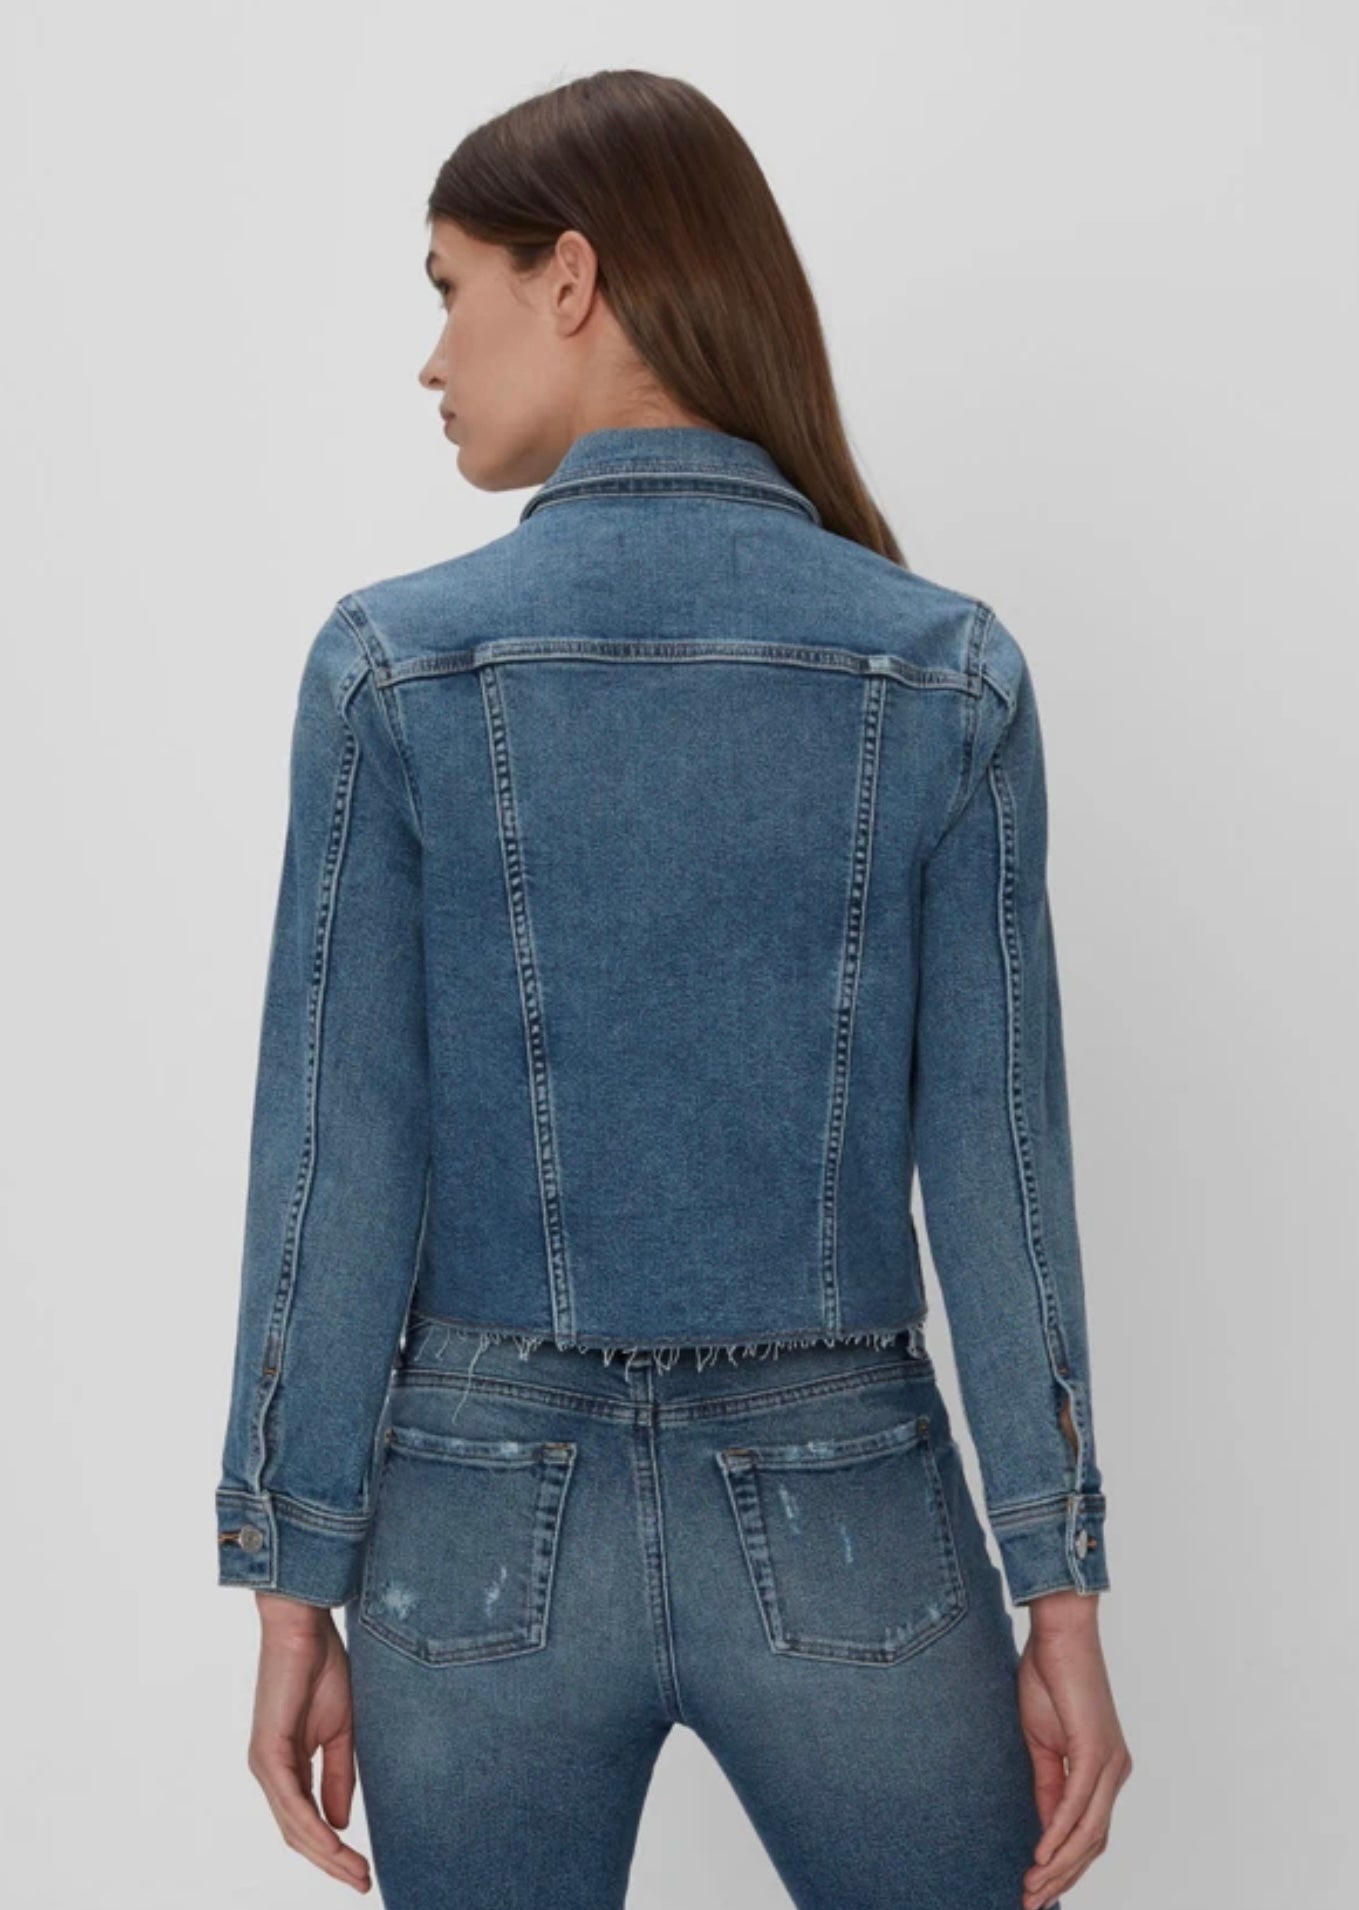 7 For All Mankind ‘Classic Trucker Jacket’